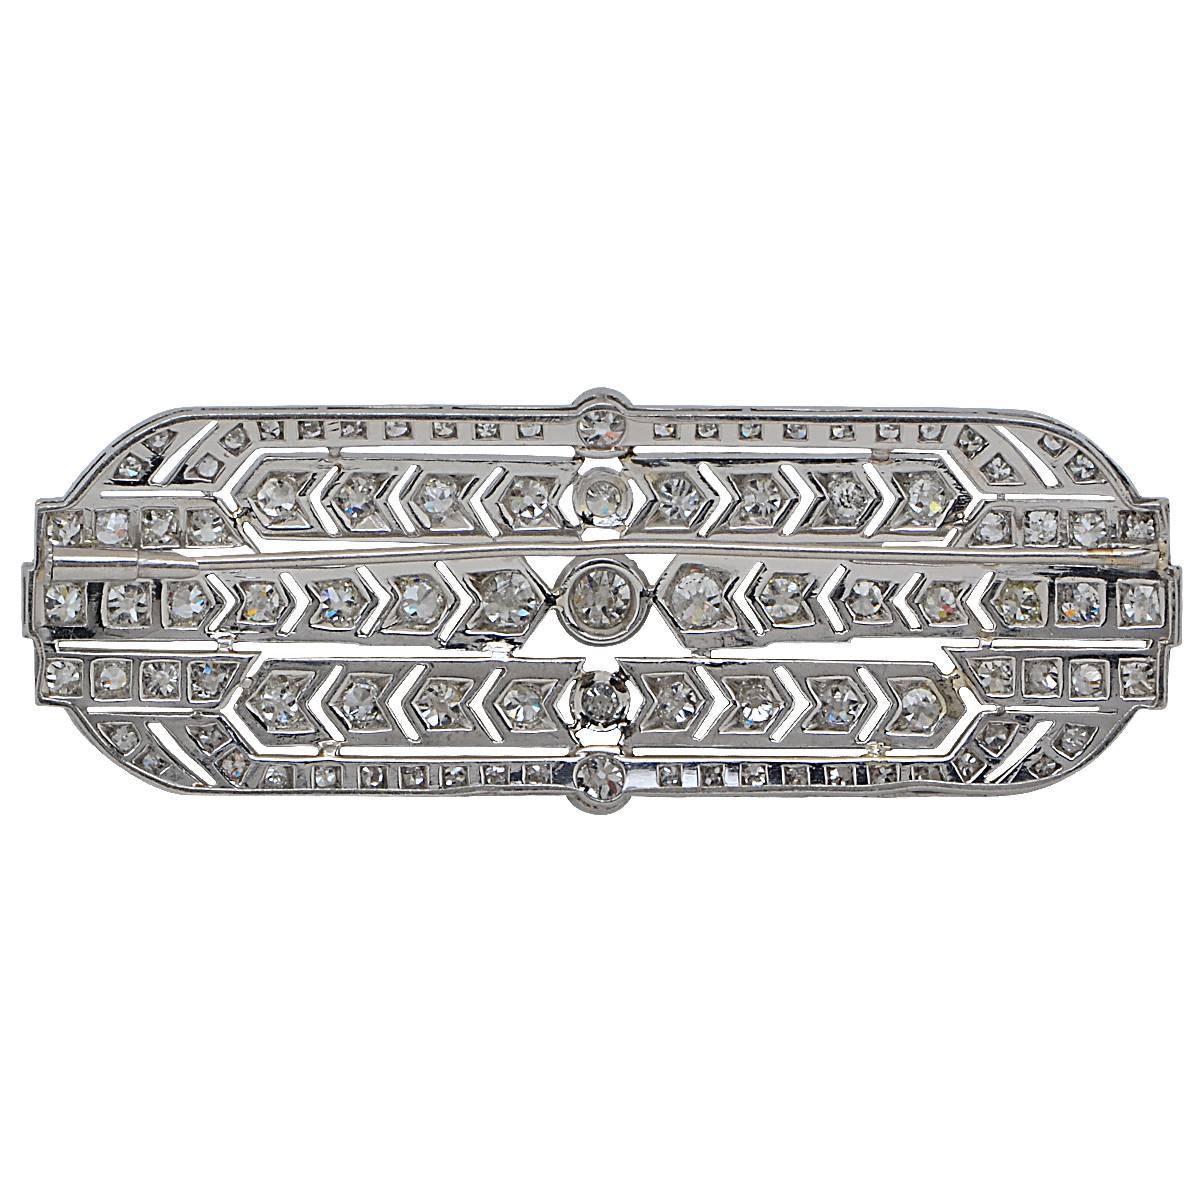 Platinum Deco Diamond Brooch Featuring 95 Old European Cut Diamonds with an Estimated Total Weight of 10 Carats, F Color, VS Clarity.

Weight: 29.85 grams

This Brooch is Accompanied by a Retail Appraisal Performed by an Accredited Gemologist.